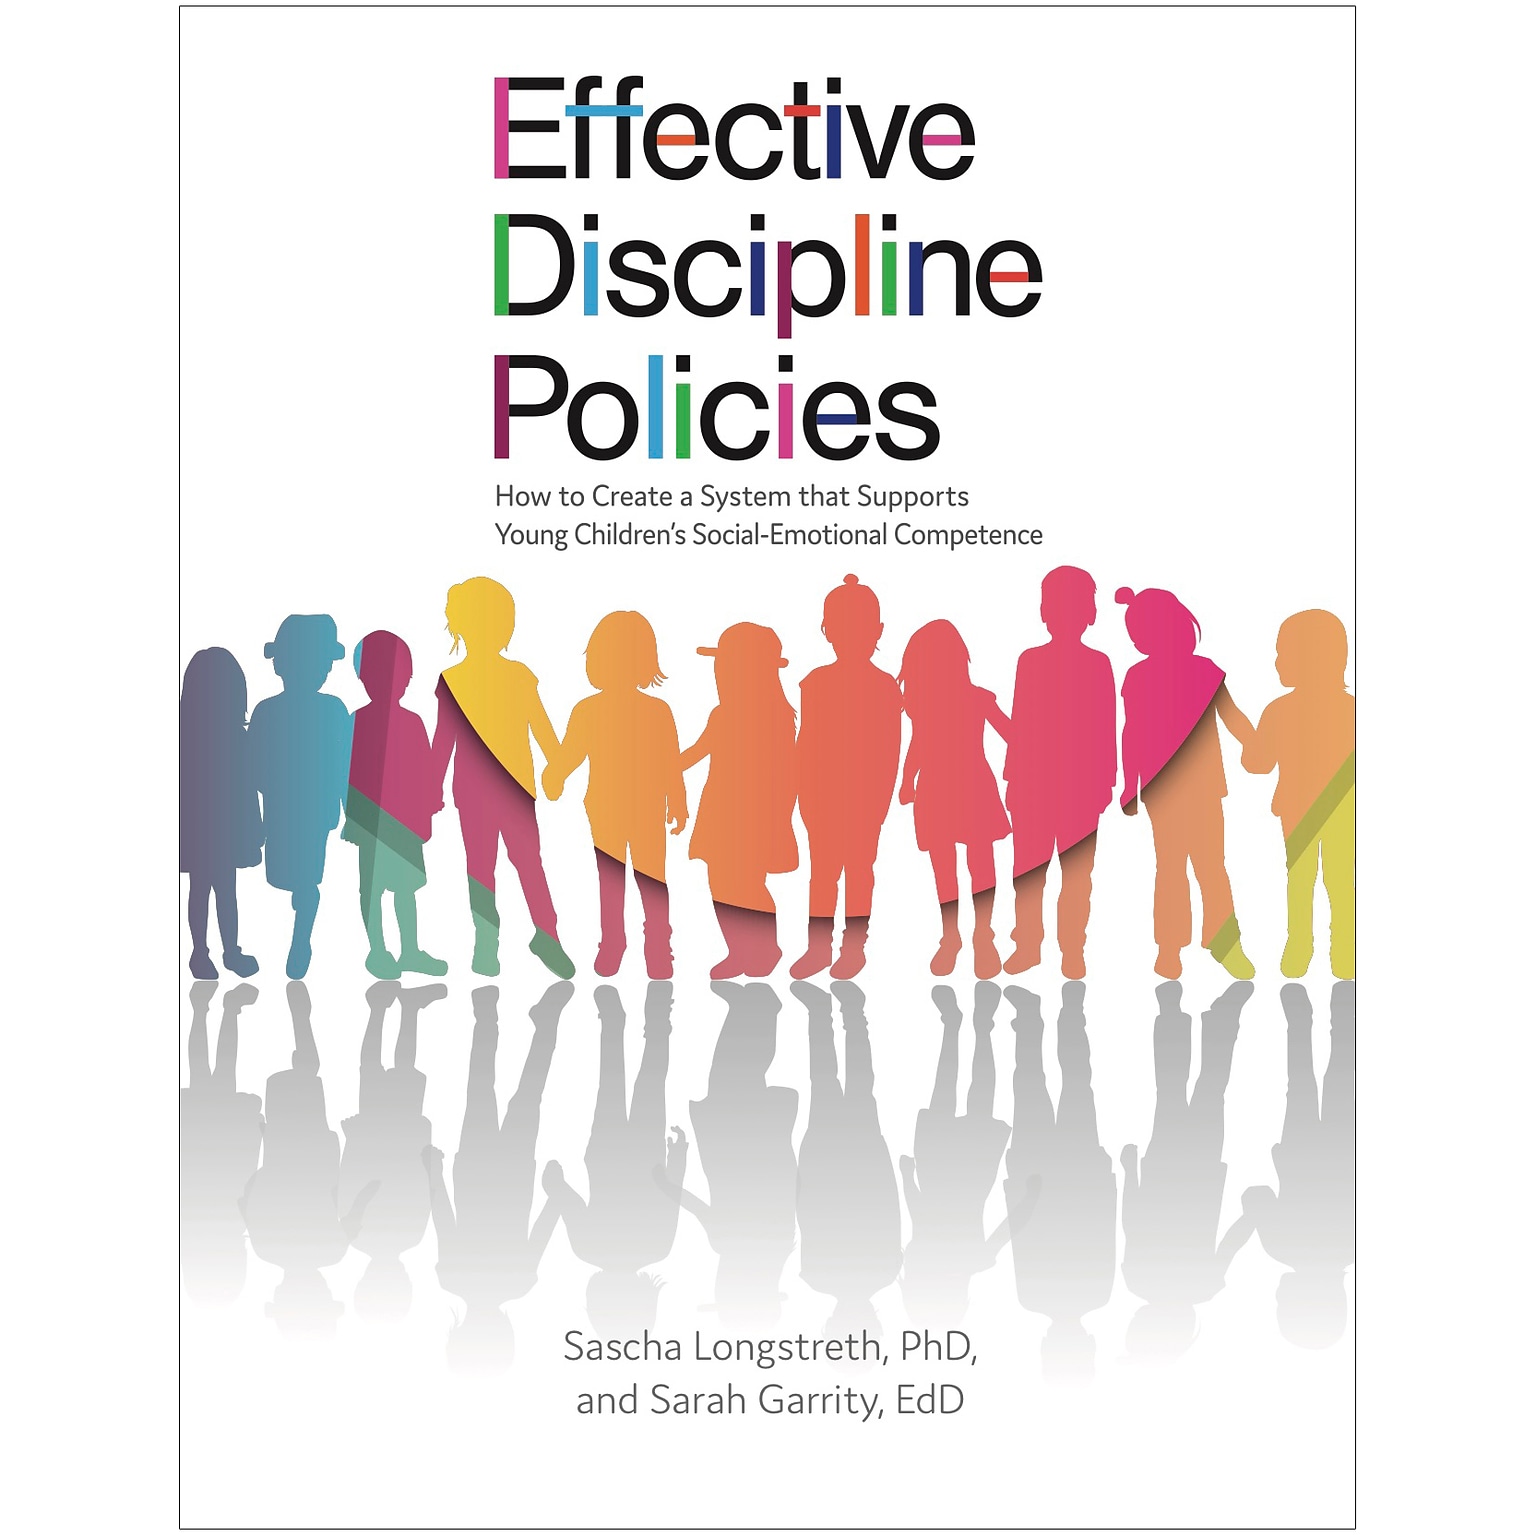 Effective Discipline Policies: How to Create a System that Supports Young Children’s Social-Emotional Competence